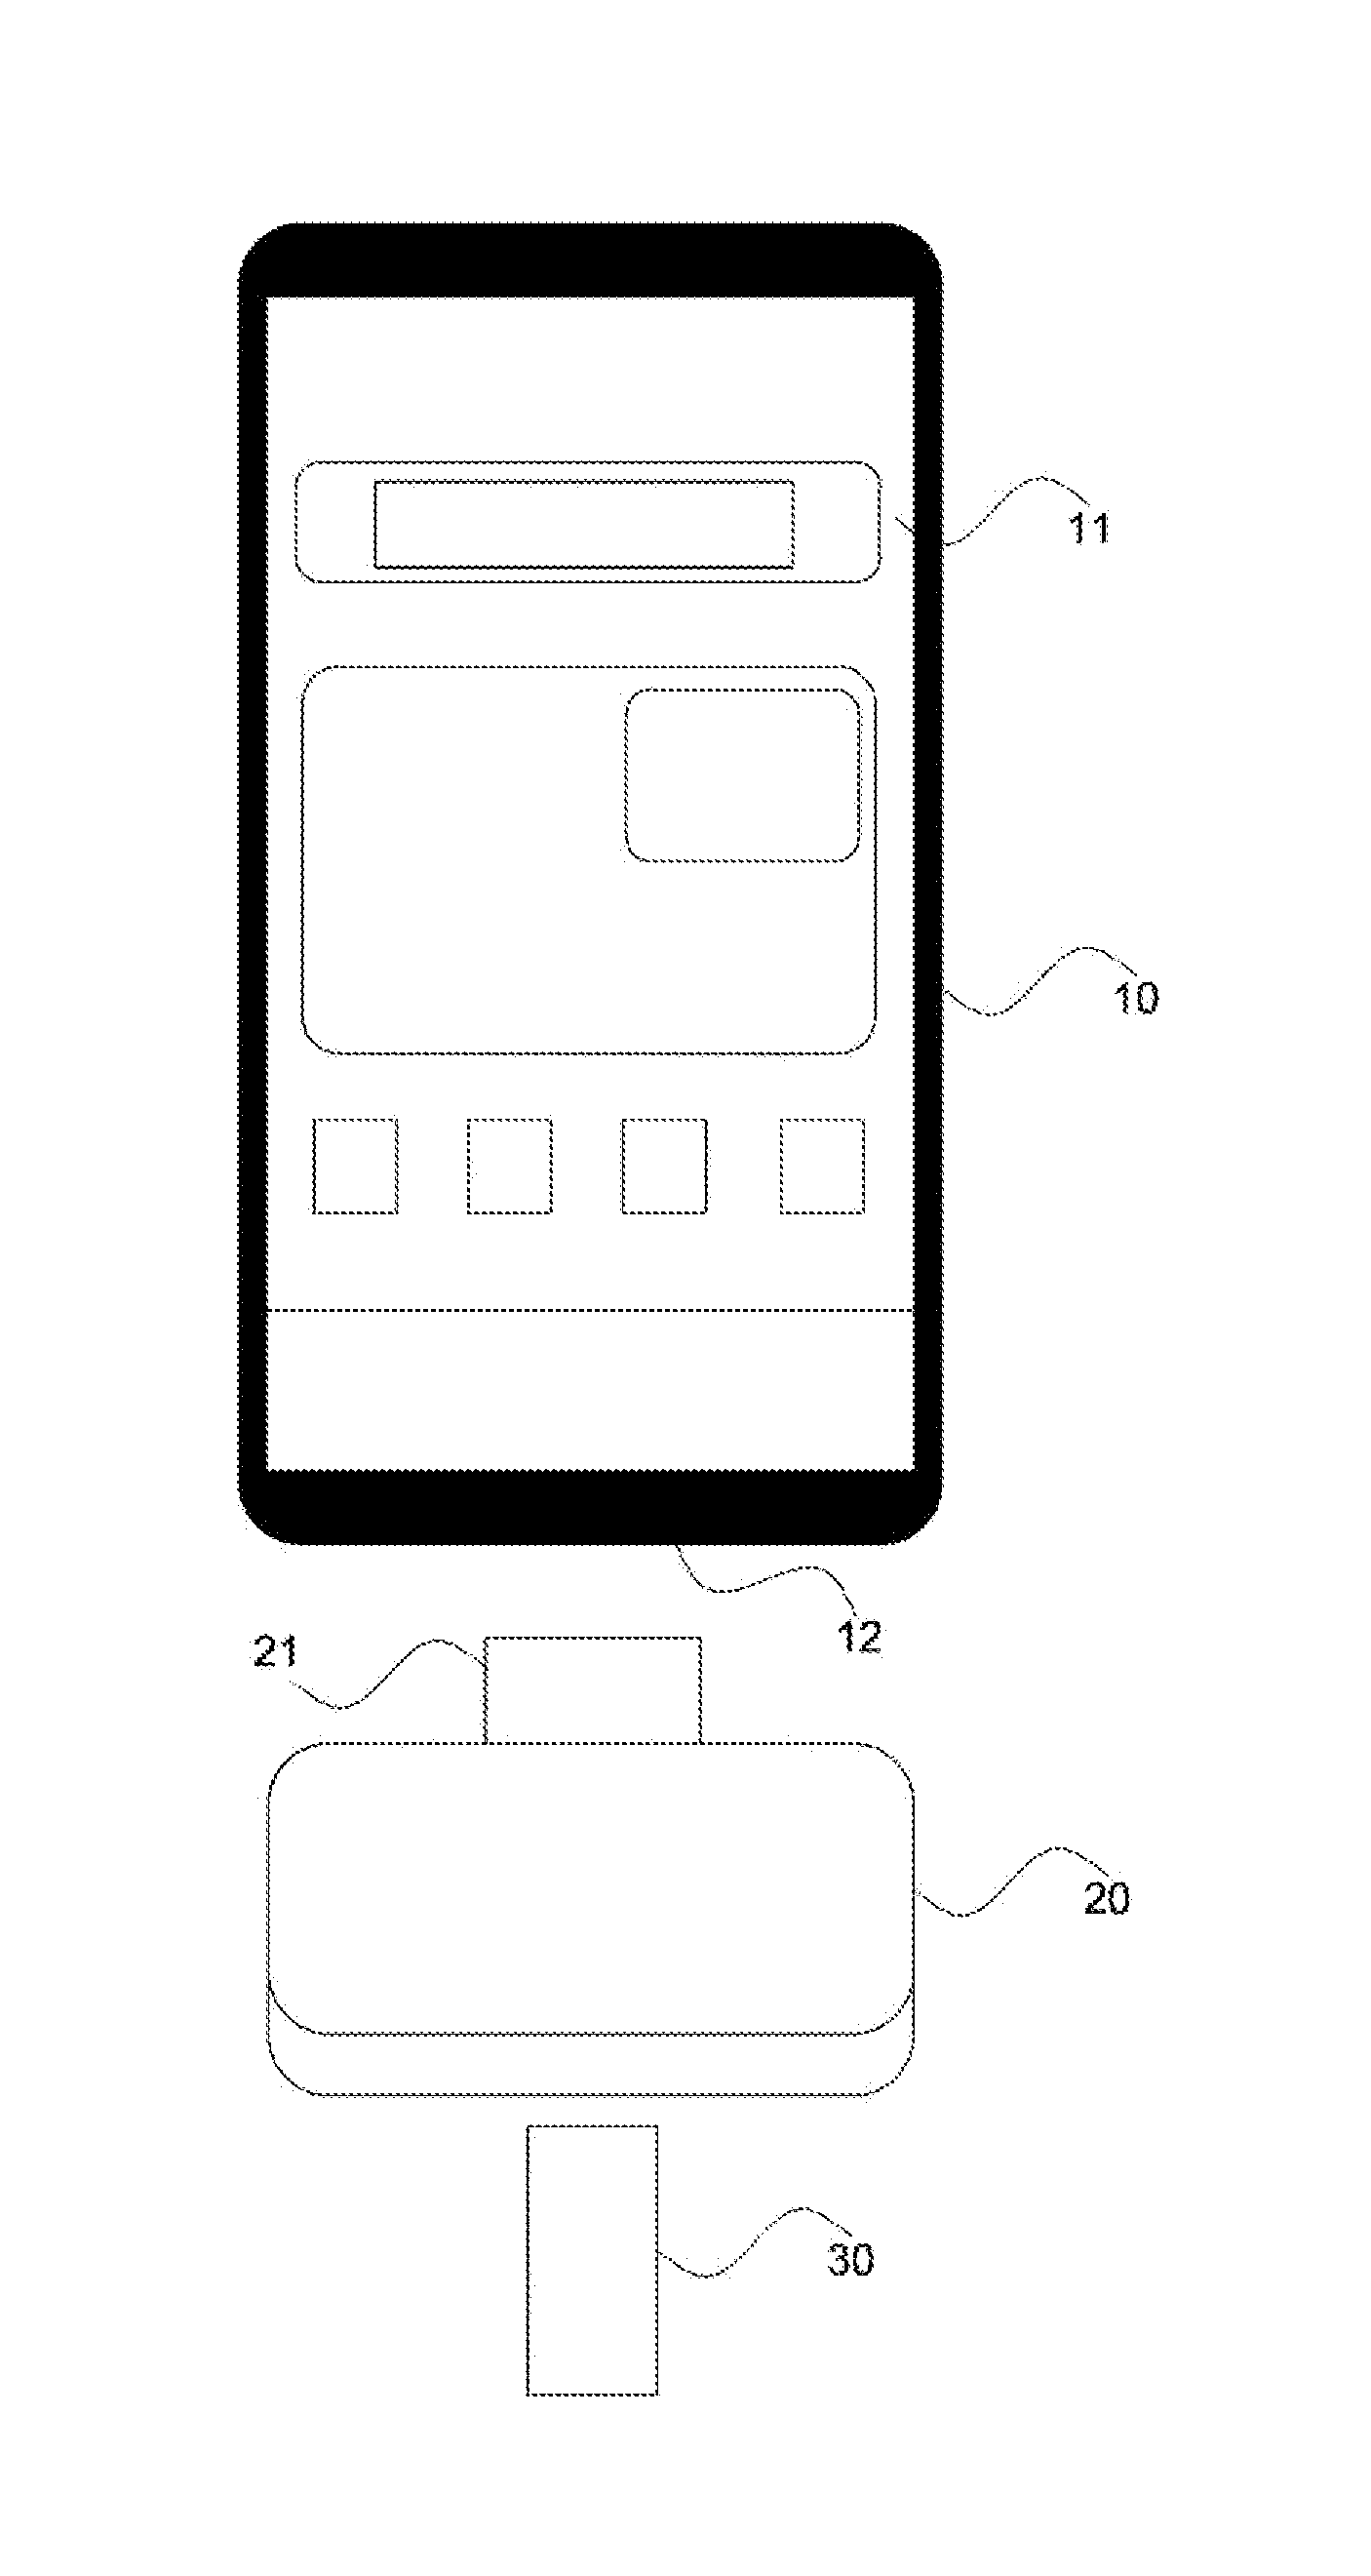 Blood glucose management device capable of generating valid blood glucose data, and operation method therefor